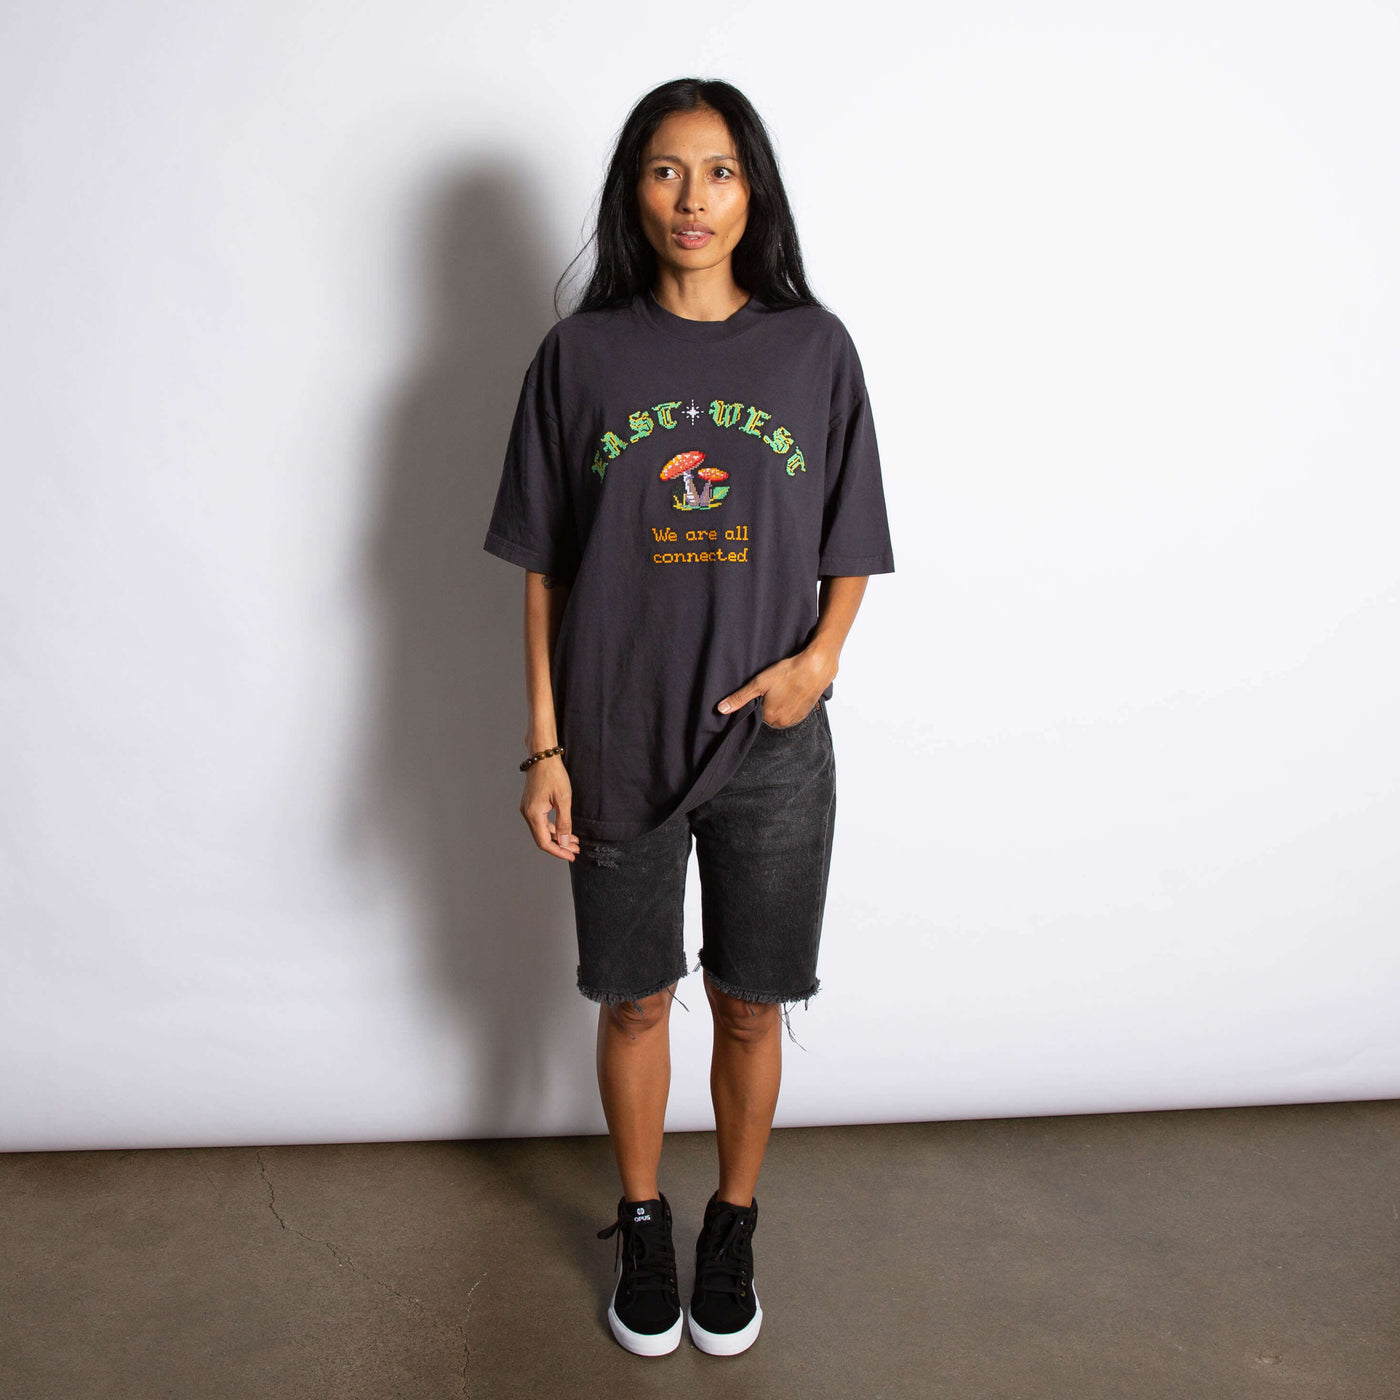 East West "We Are All Connected" Mushroom Tee - Dusty Navy is Kim my